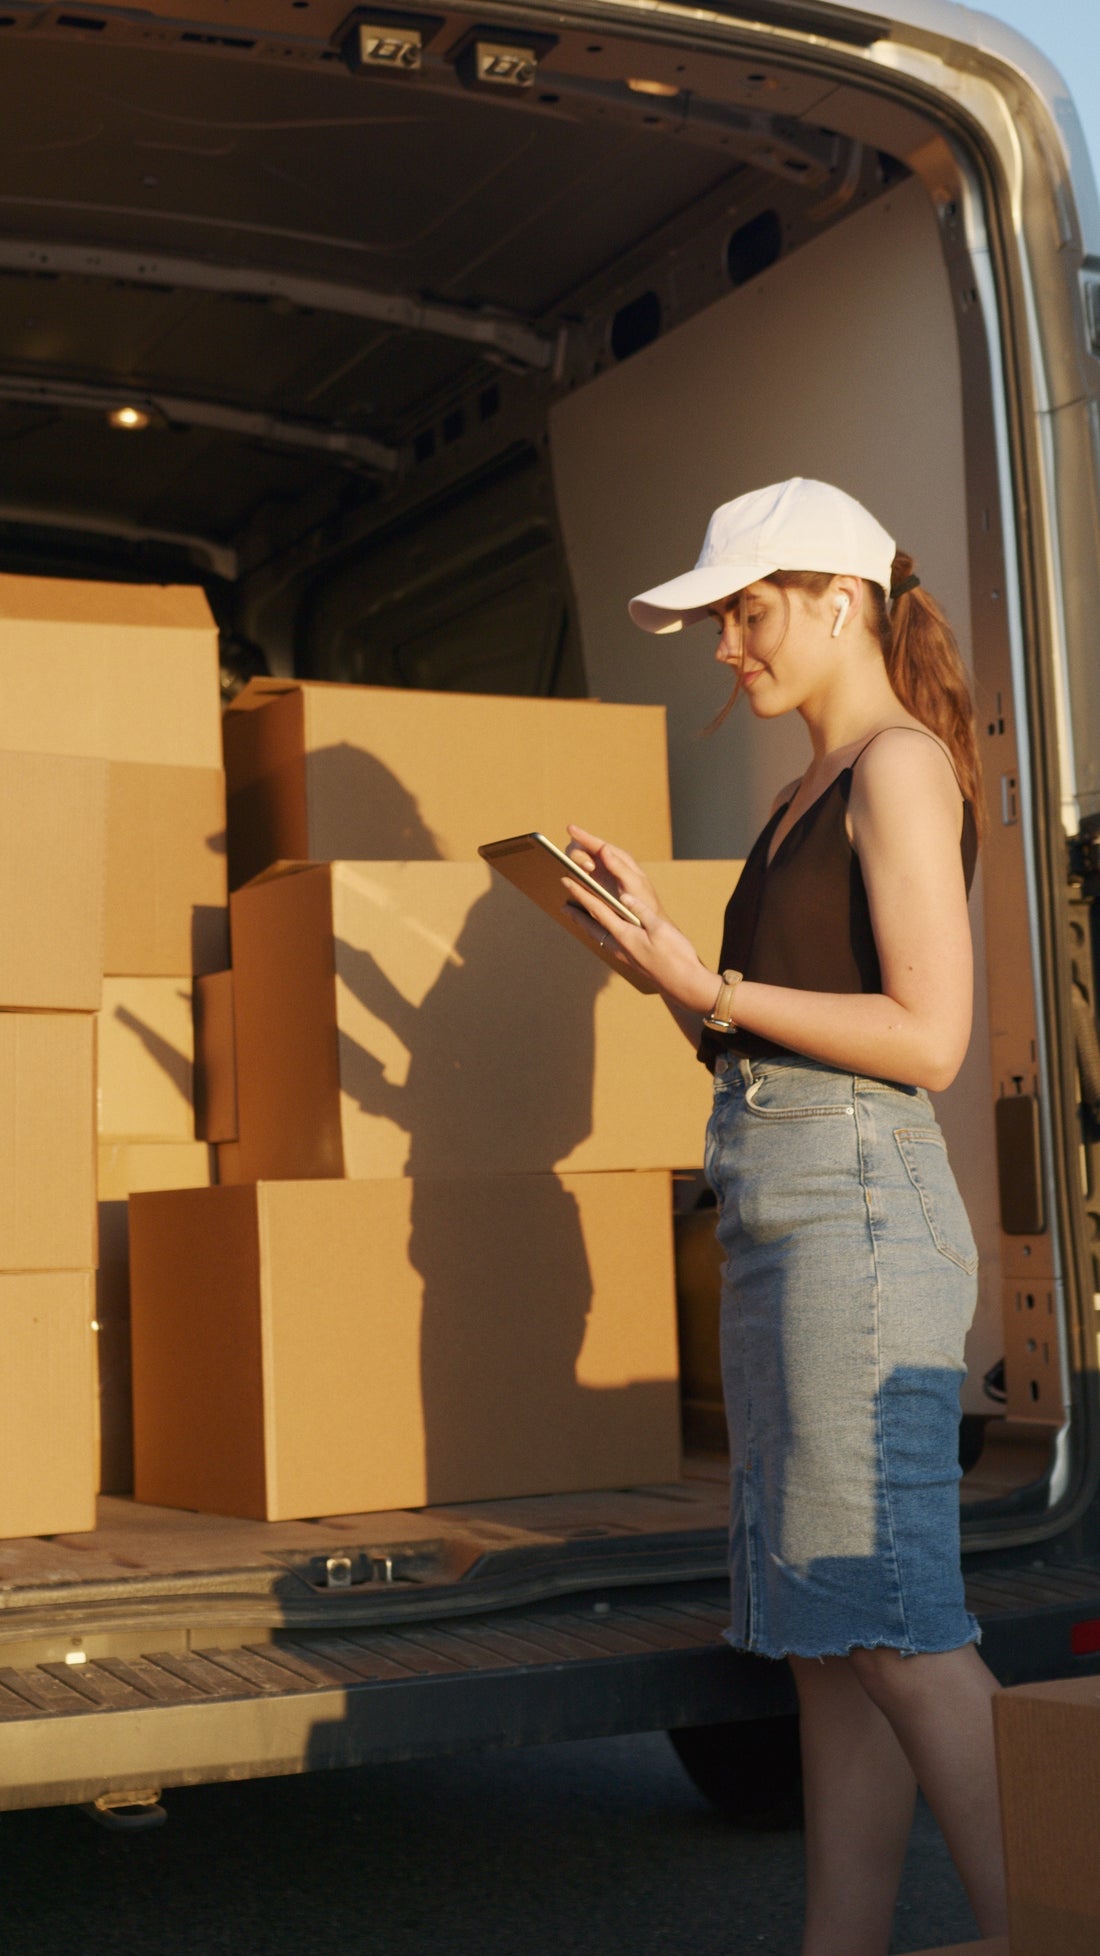 How to Save as a Delivery Service Company